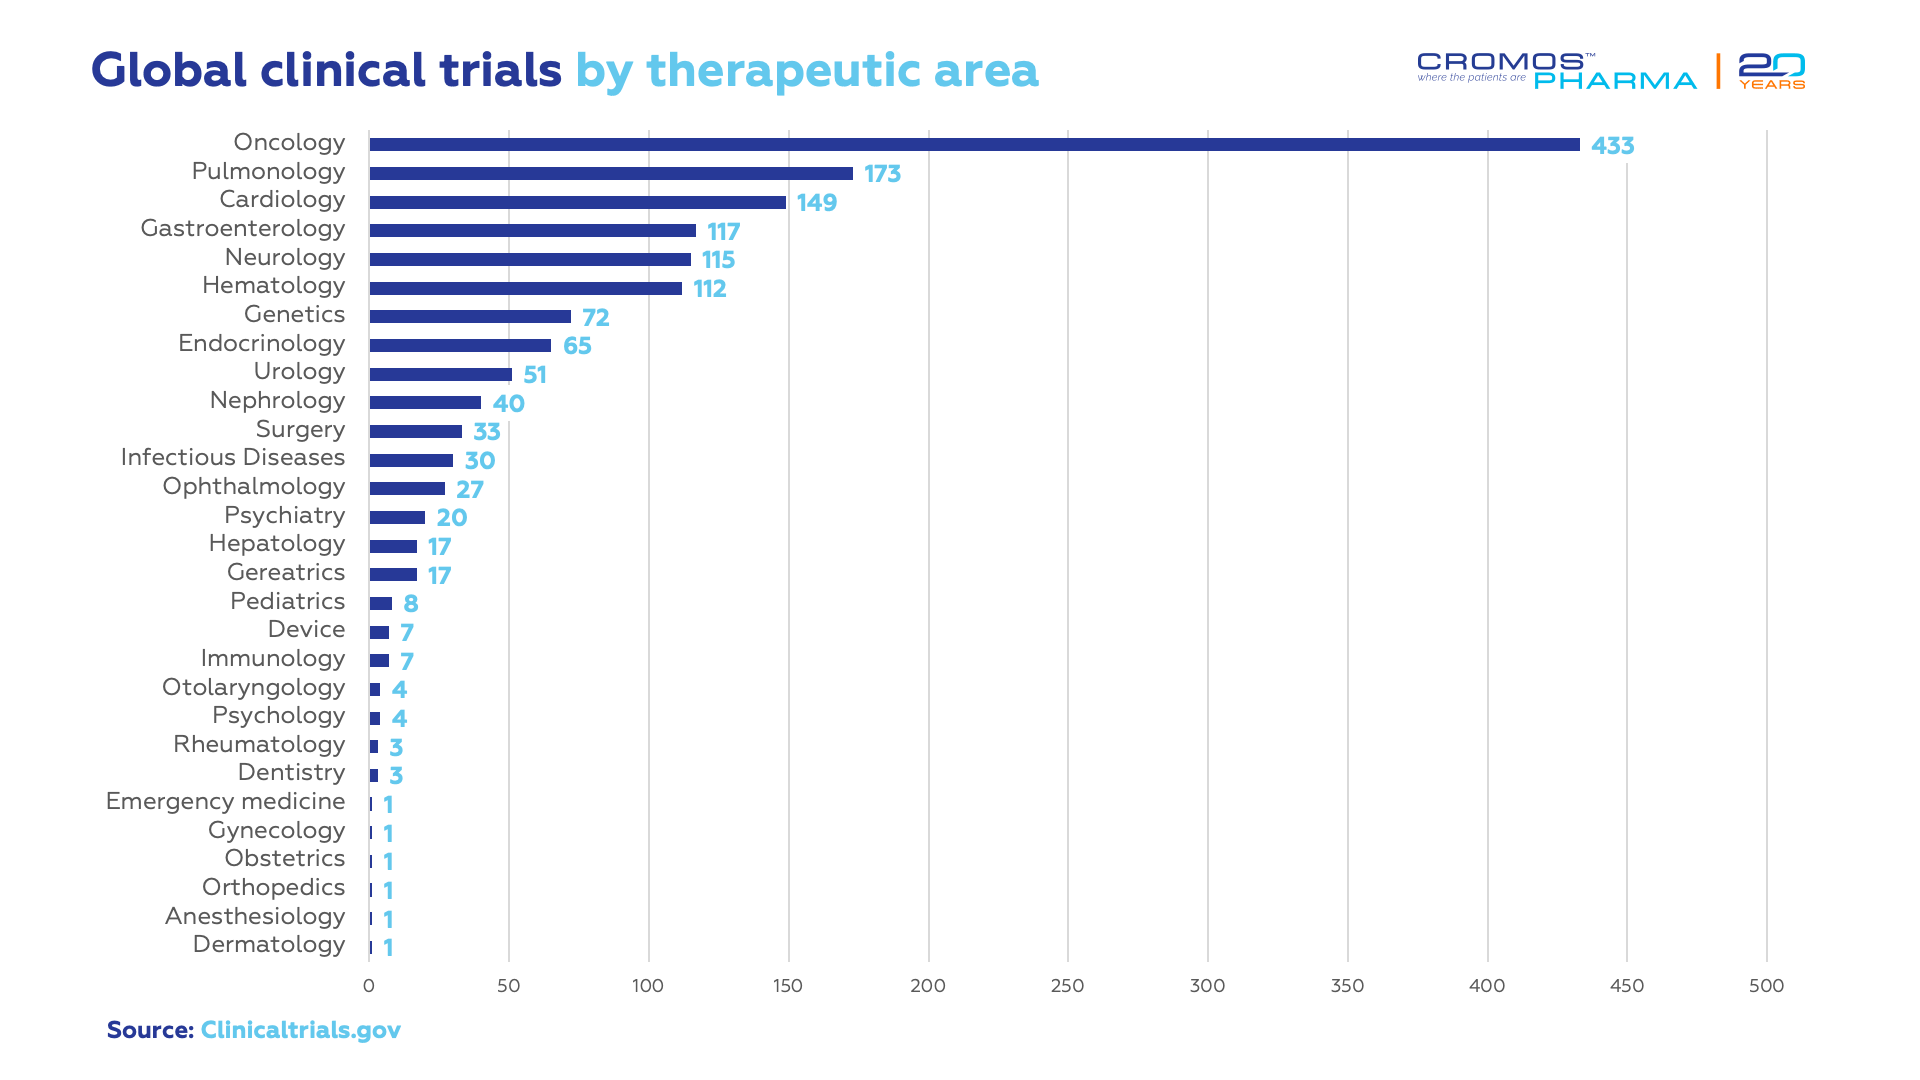 Clinical trials by therapeutic area in Hungary | Cromos Pharma